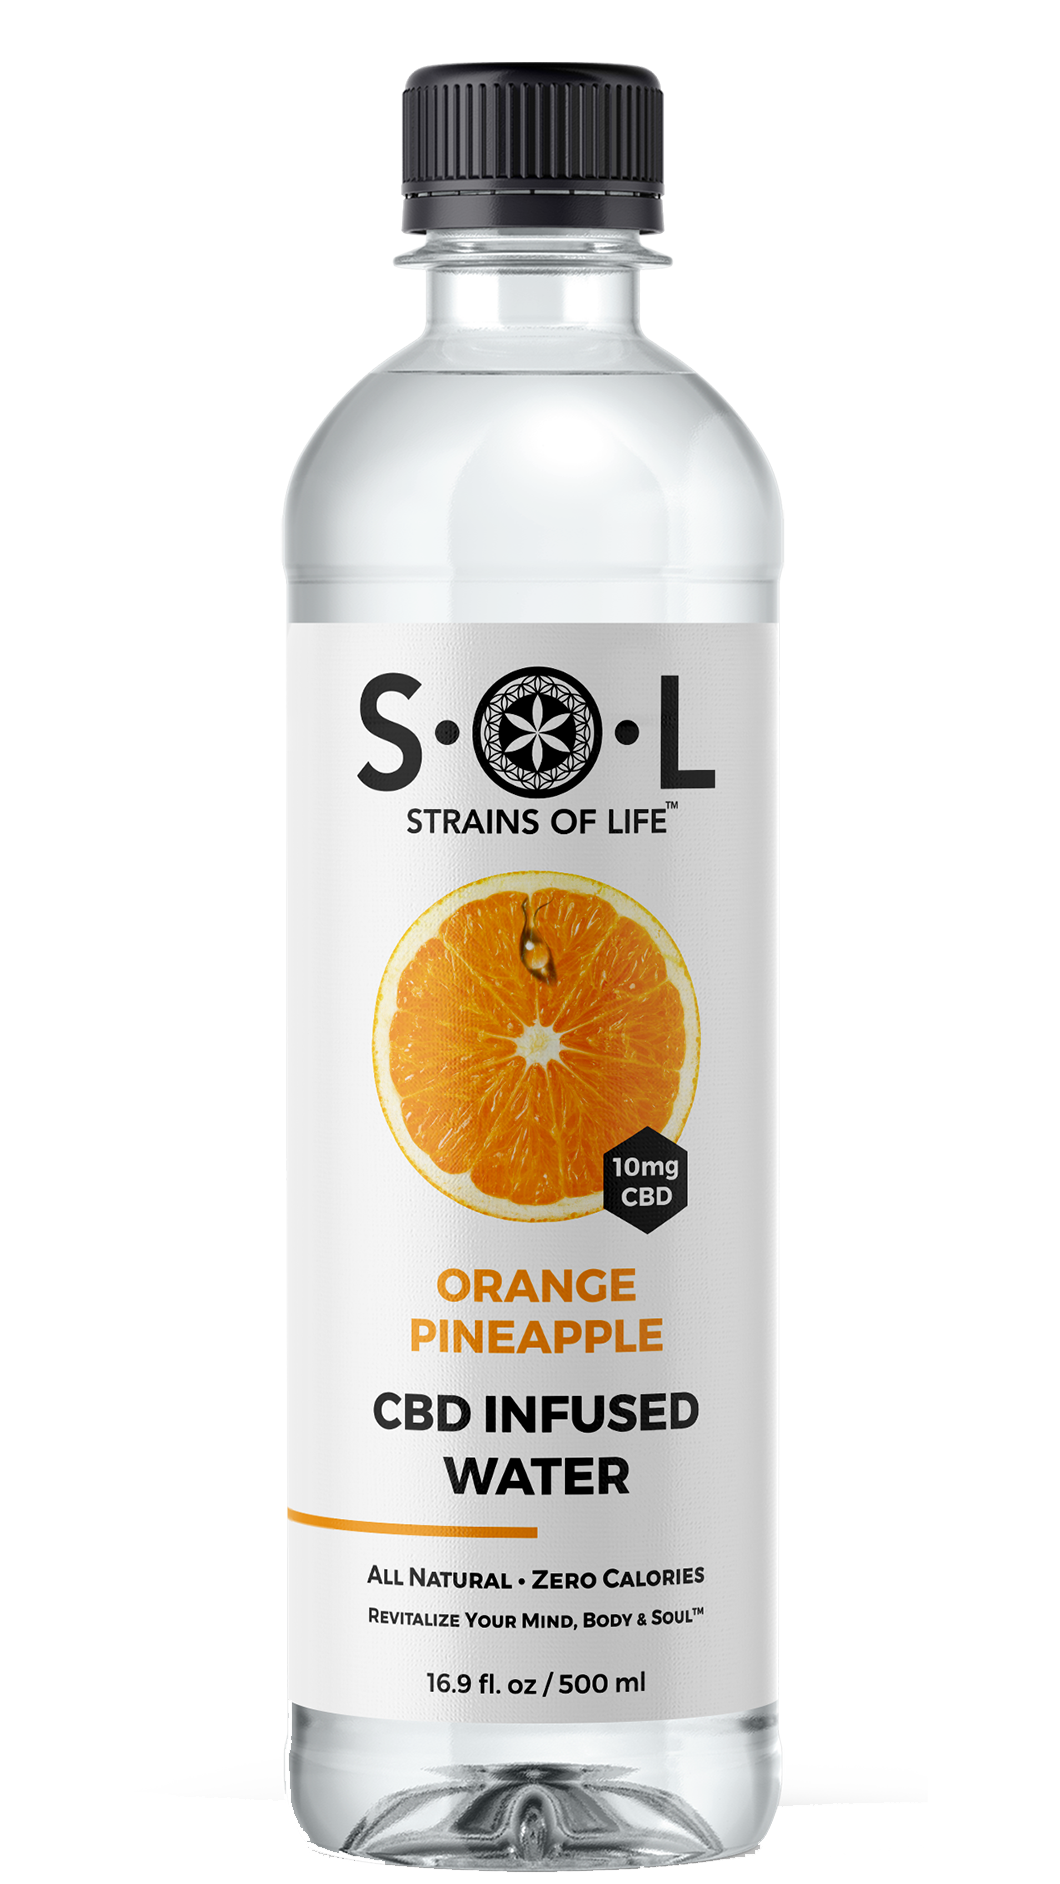 CBD Infused Water. cbd infused sparkling water. Are cbd infused water legal in the us?